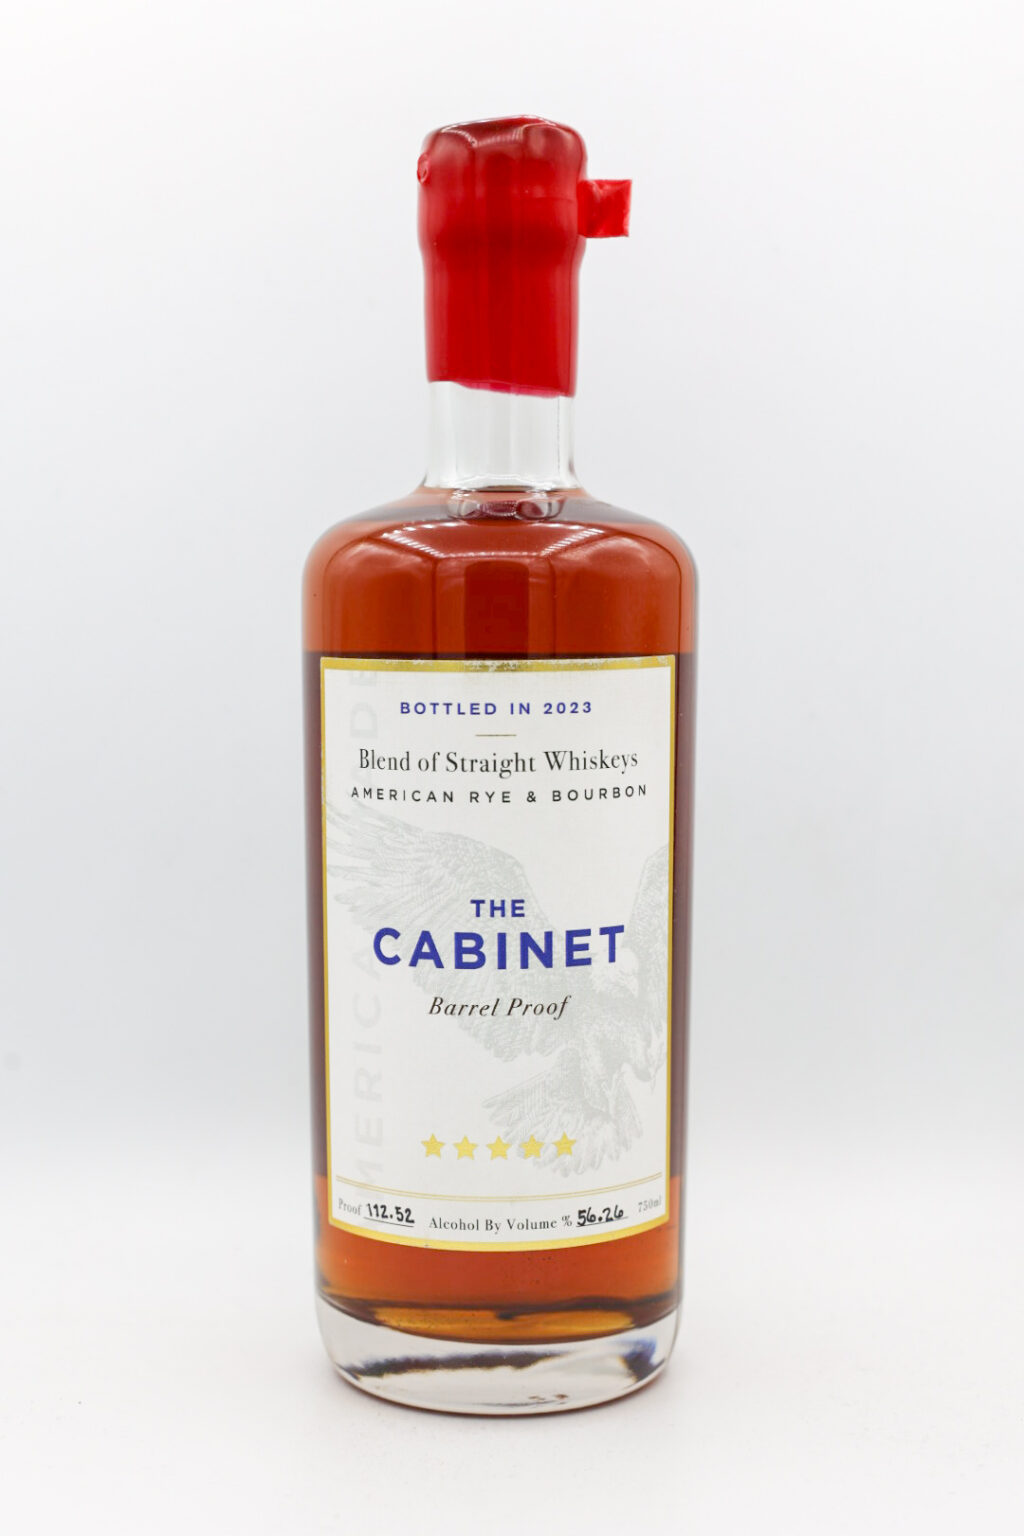 Proof and Wood “The Cabinet” Straight Bourbon & Rye 2023